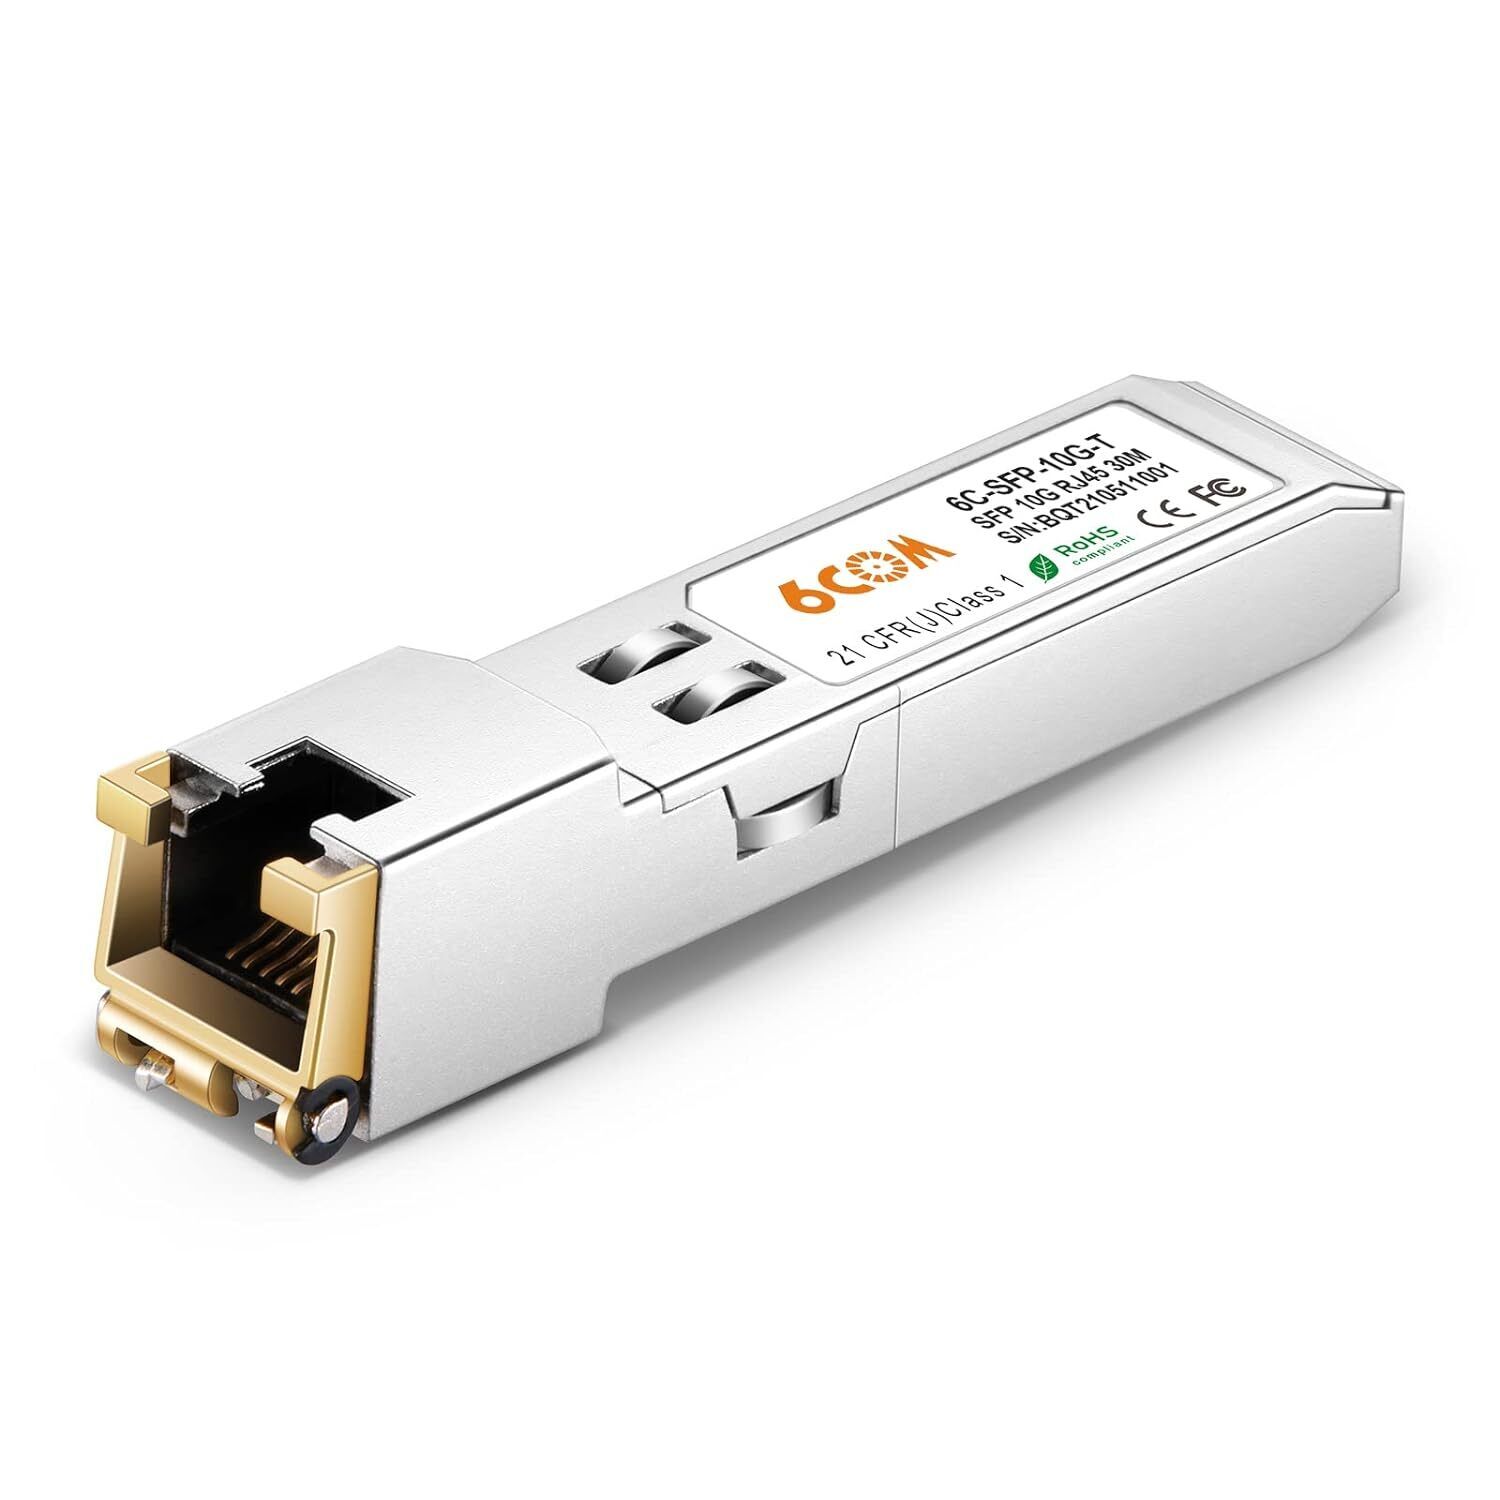 10Gbase-T Sfp+ Copper Transceiver, 10G Sfp 10G-T Rj45 Module Up To 30 Meters,